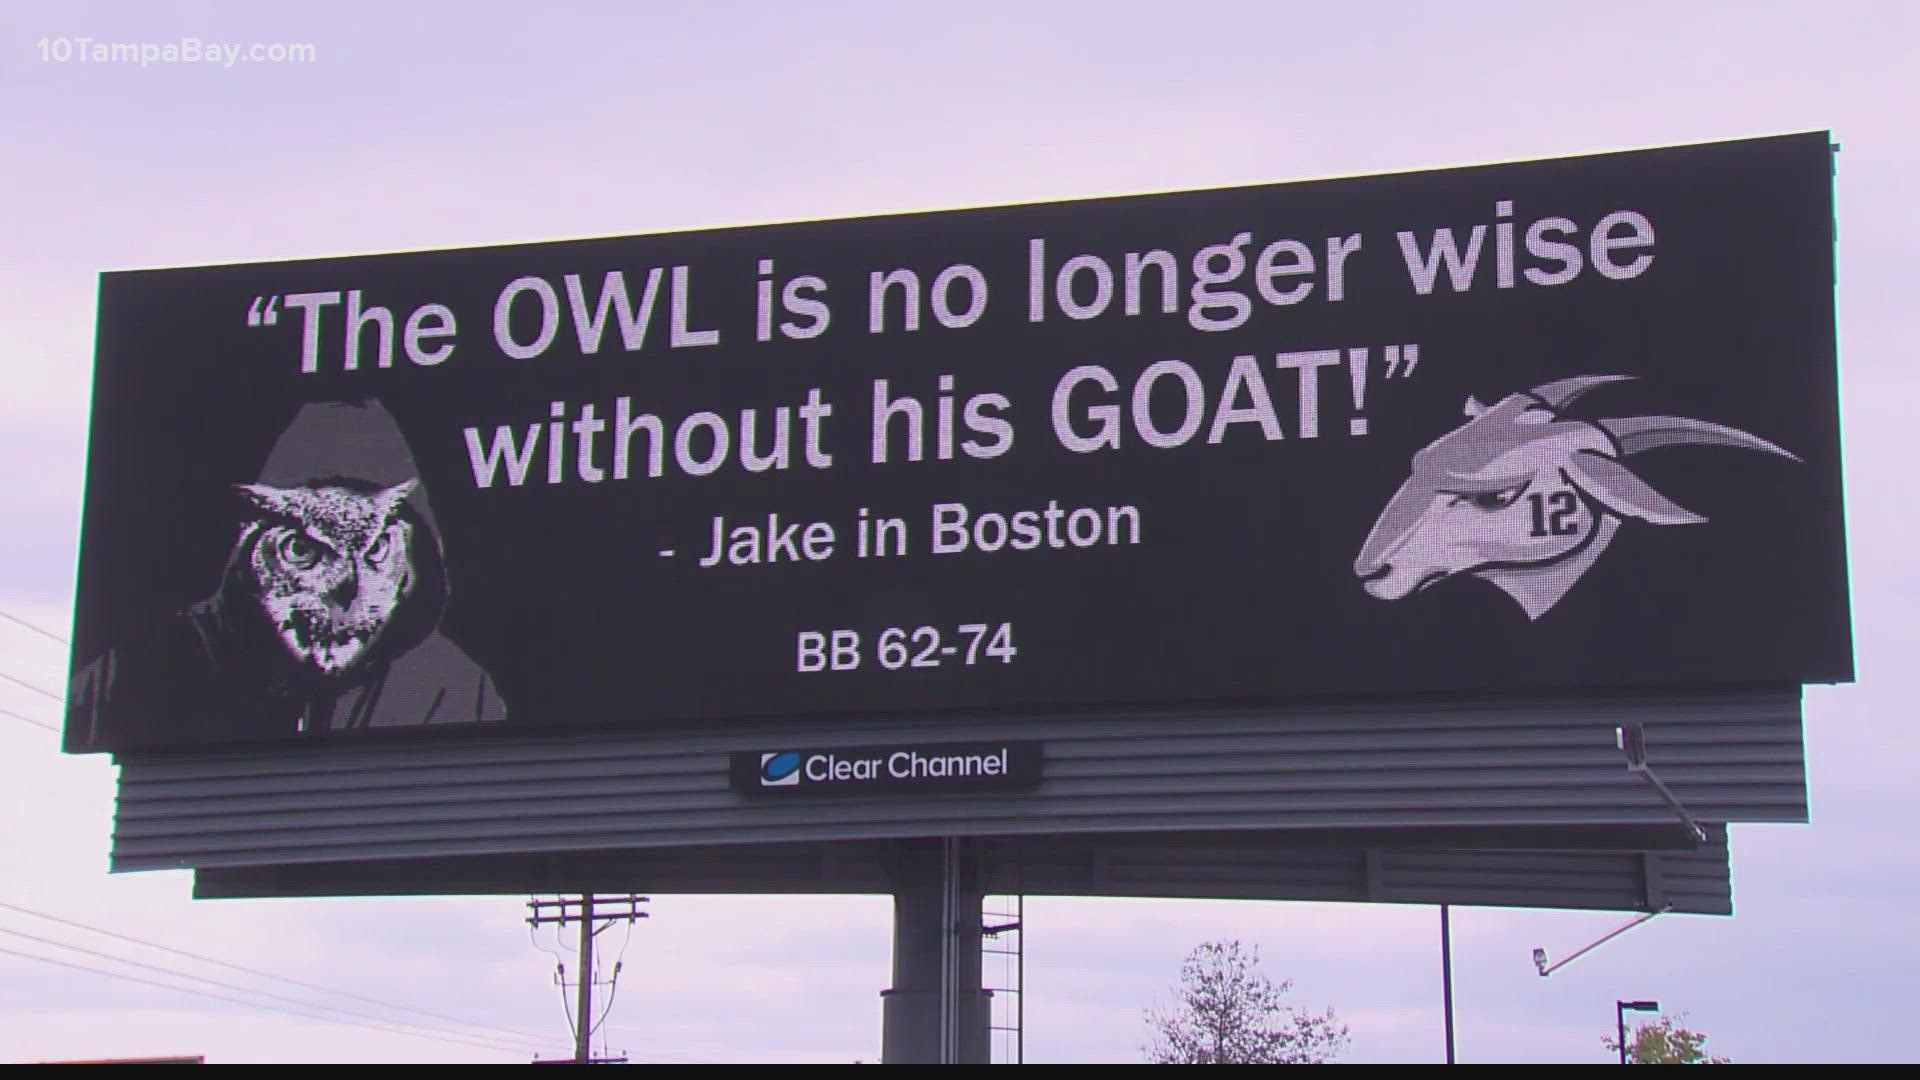 The billboard towers over Route 1, not too far from the Gillette Stadium which will force fans to see it on their way to the game, CBS Boston says.